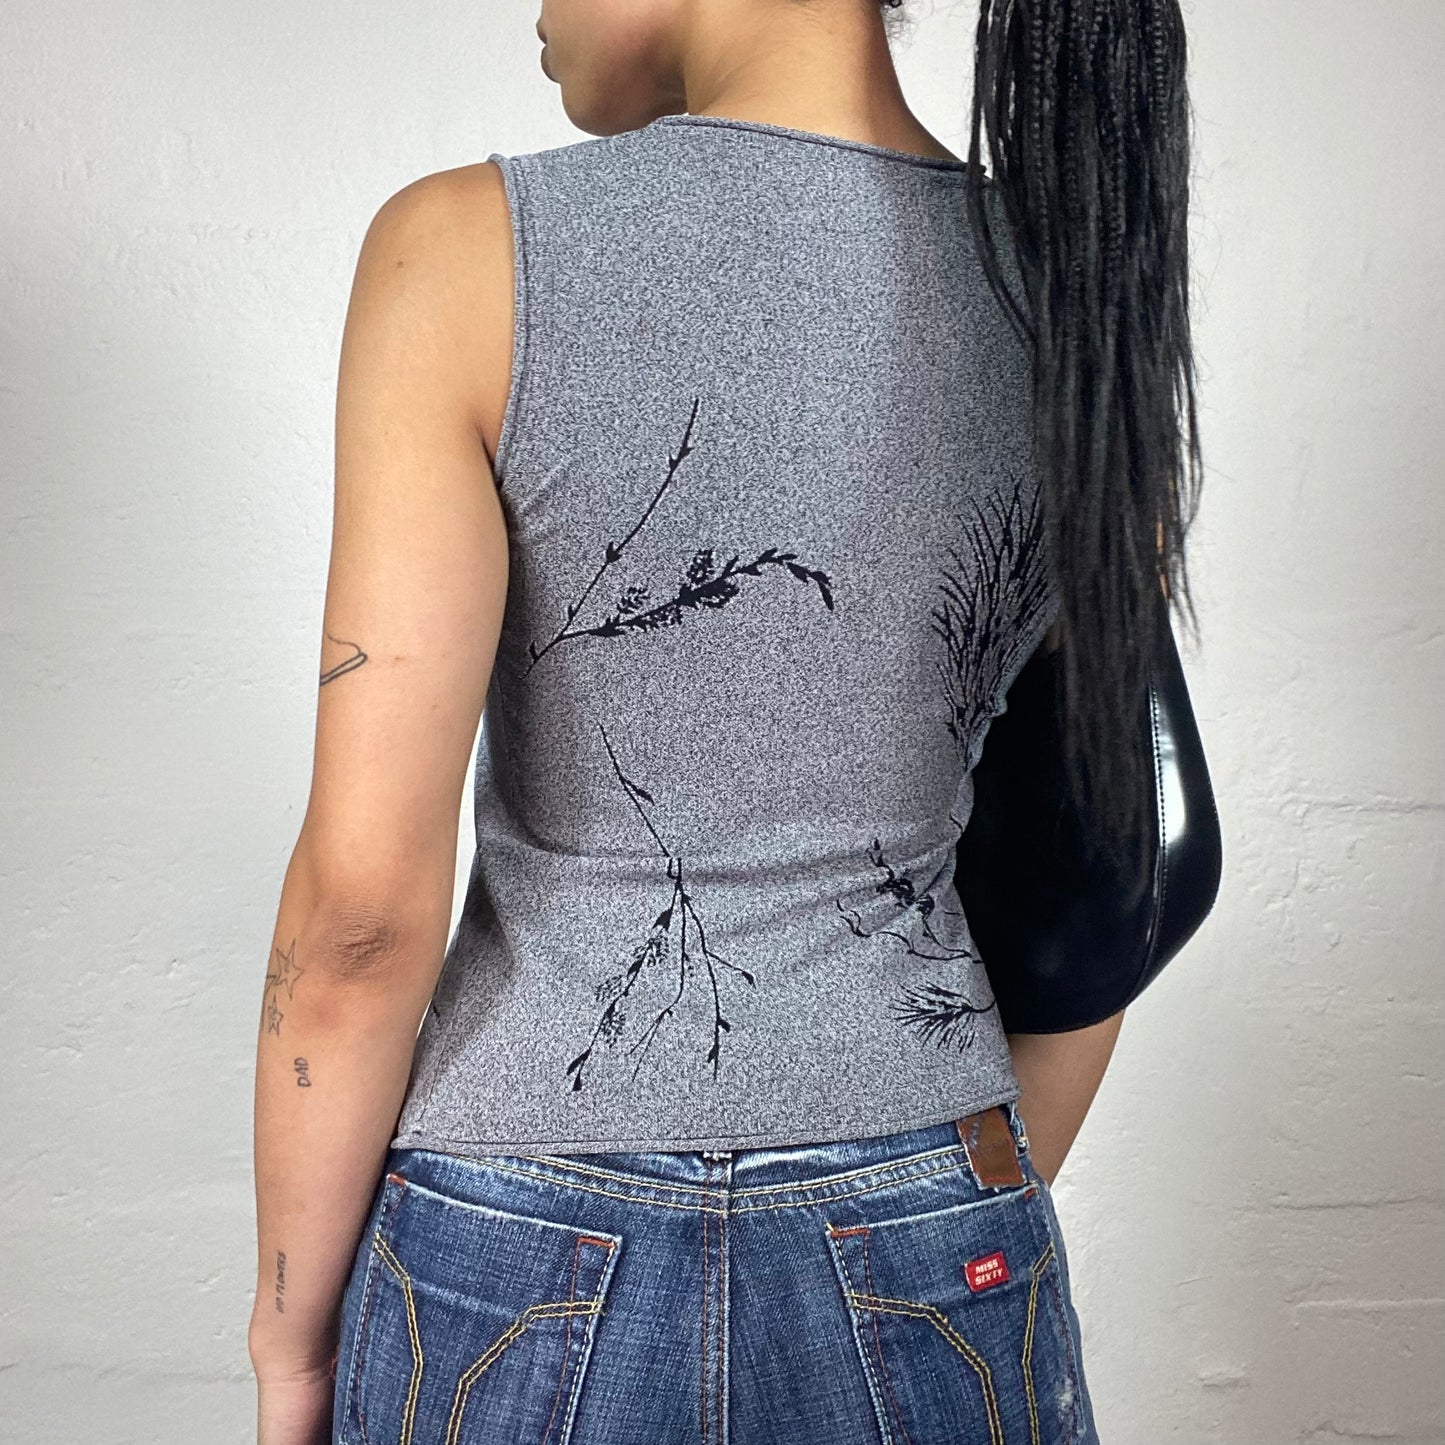 Vintage 2000's Downtown Girl Grey Knitted Jersey Tank Top with Black Leaves Print (M/L)